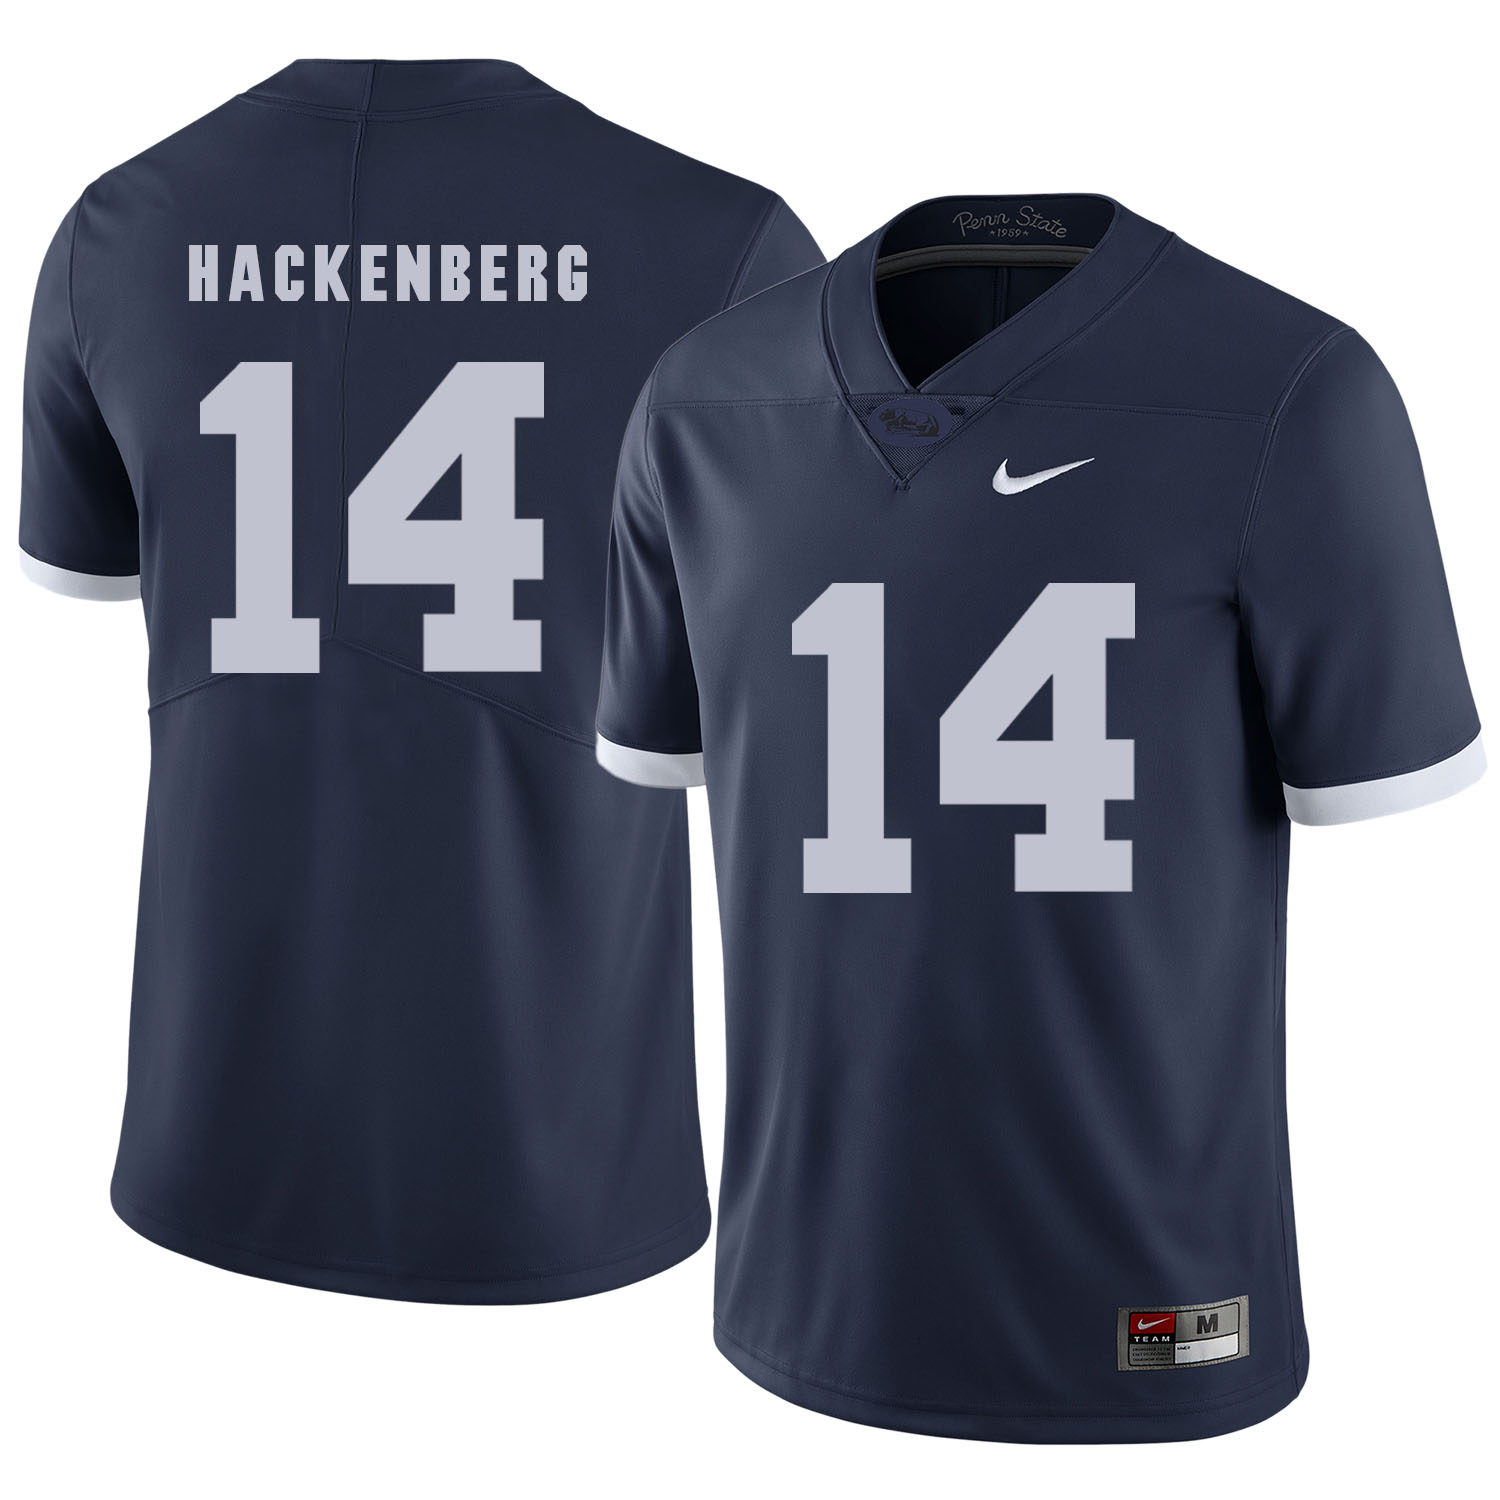 Penn State Nittany Lions 14 Christian Hackenberg Navy College Football Jersey